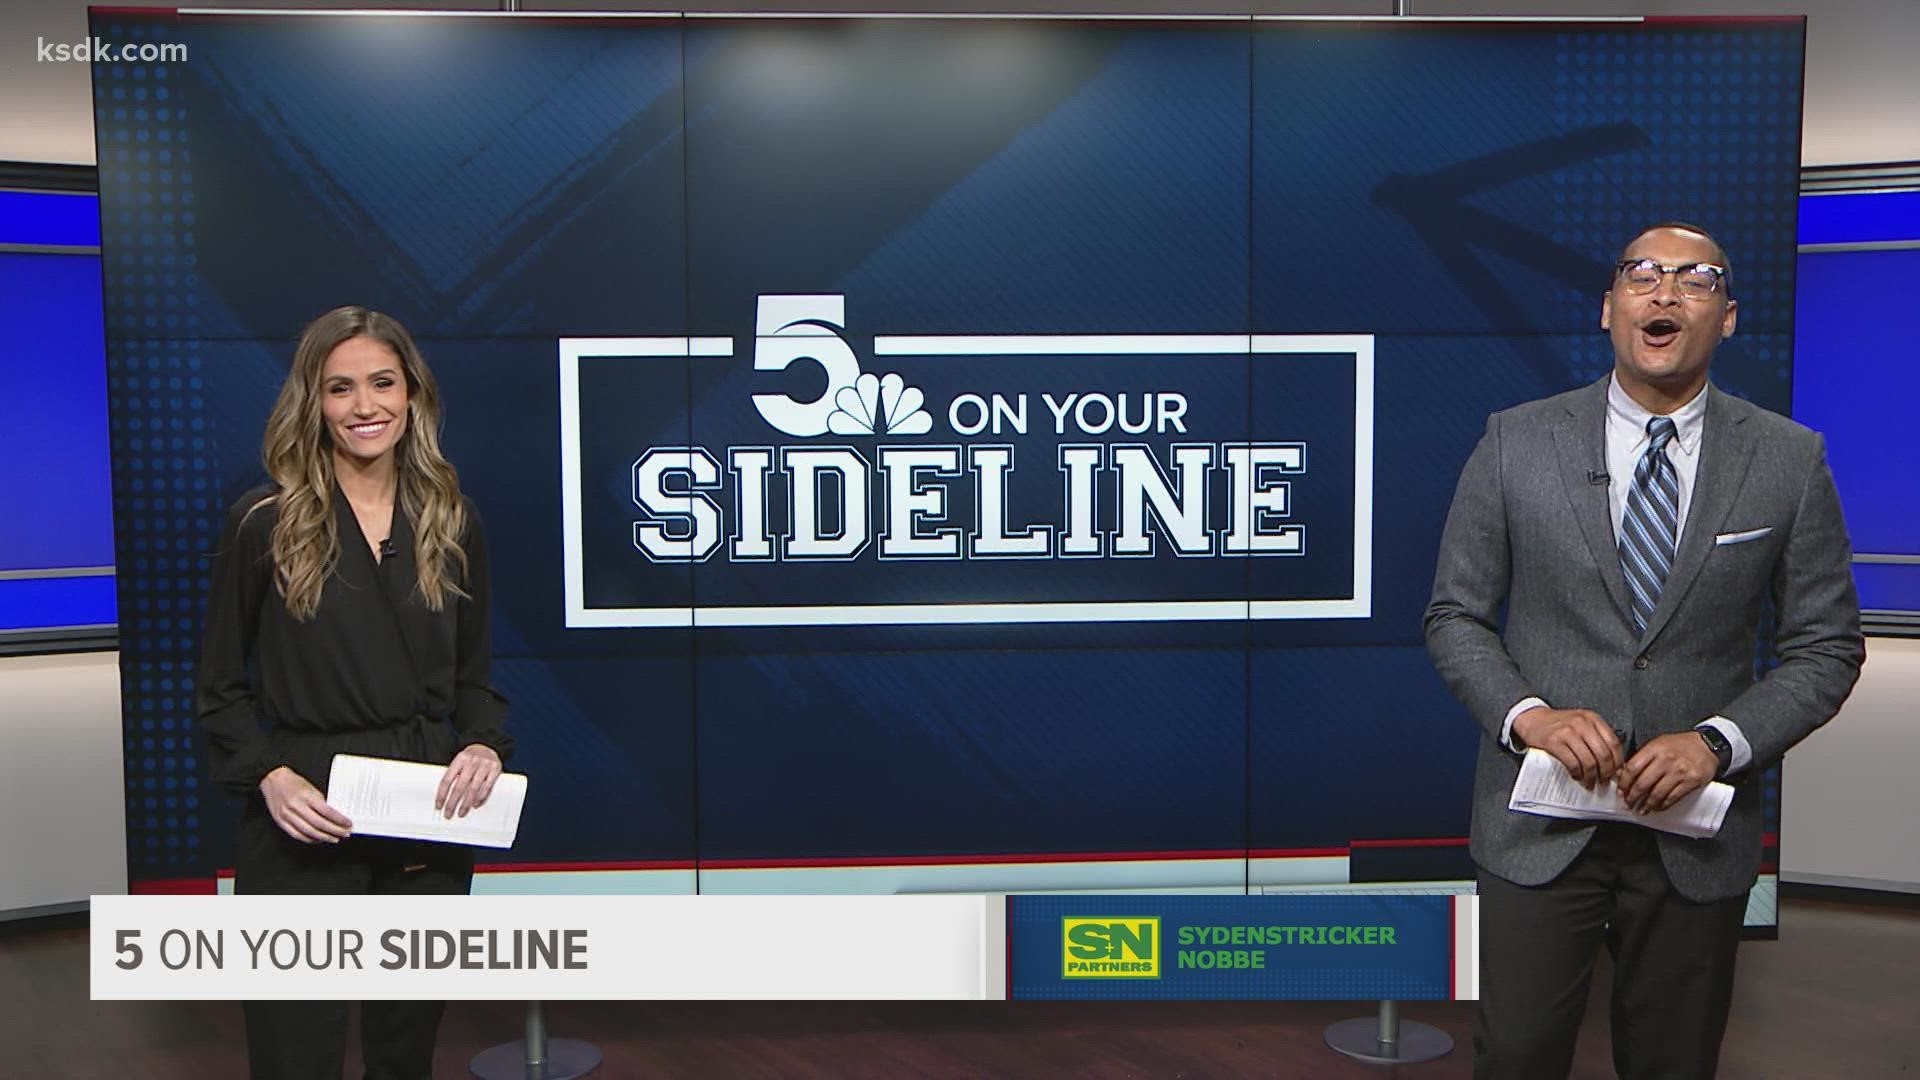 The latest high school coverage from Ahmad and Hanna on 5 On Your Sideline.